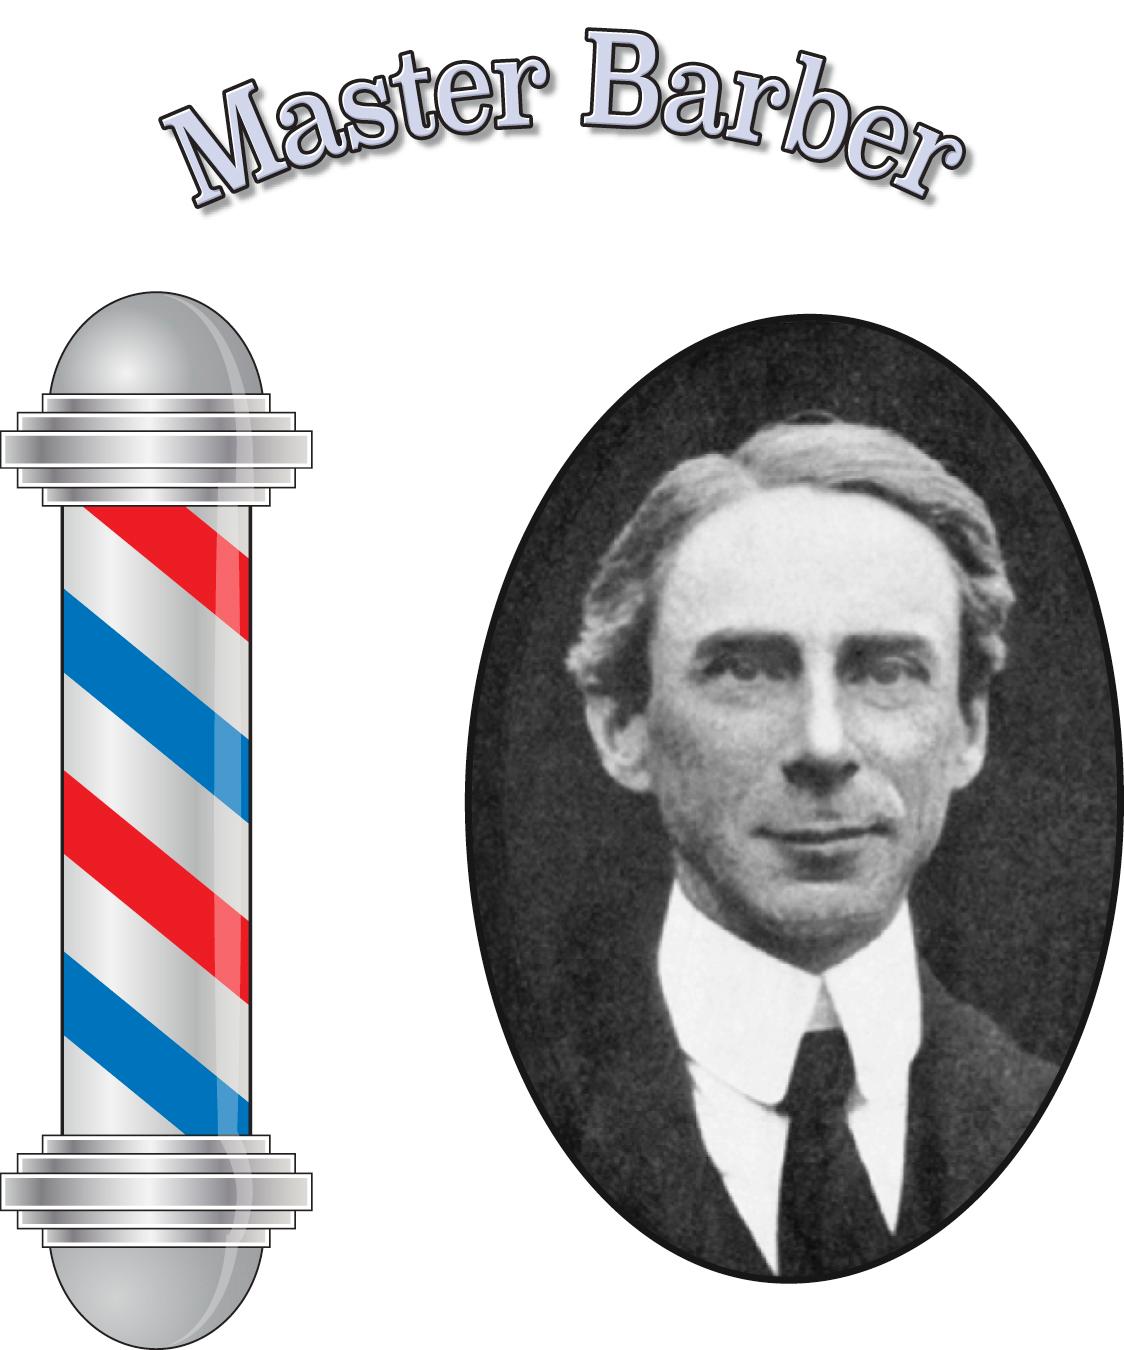 Figure 9.1, The dilemma of “who shaves the master barber?” Bertrand Russell (1872–1970), clean-shaven mathematician and philosopher.